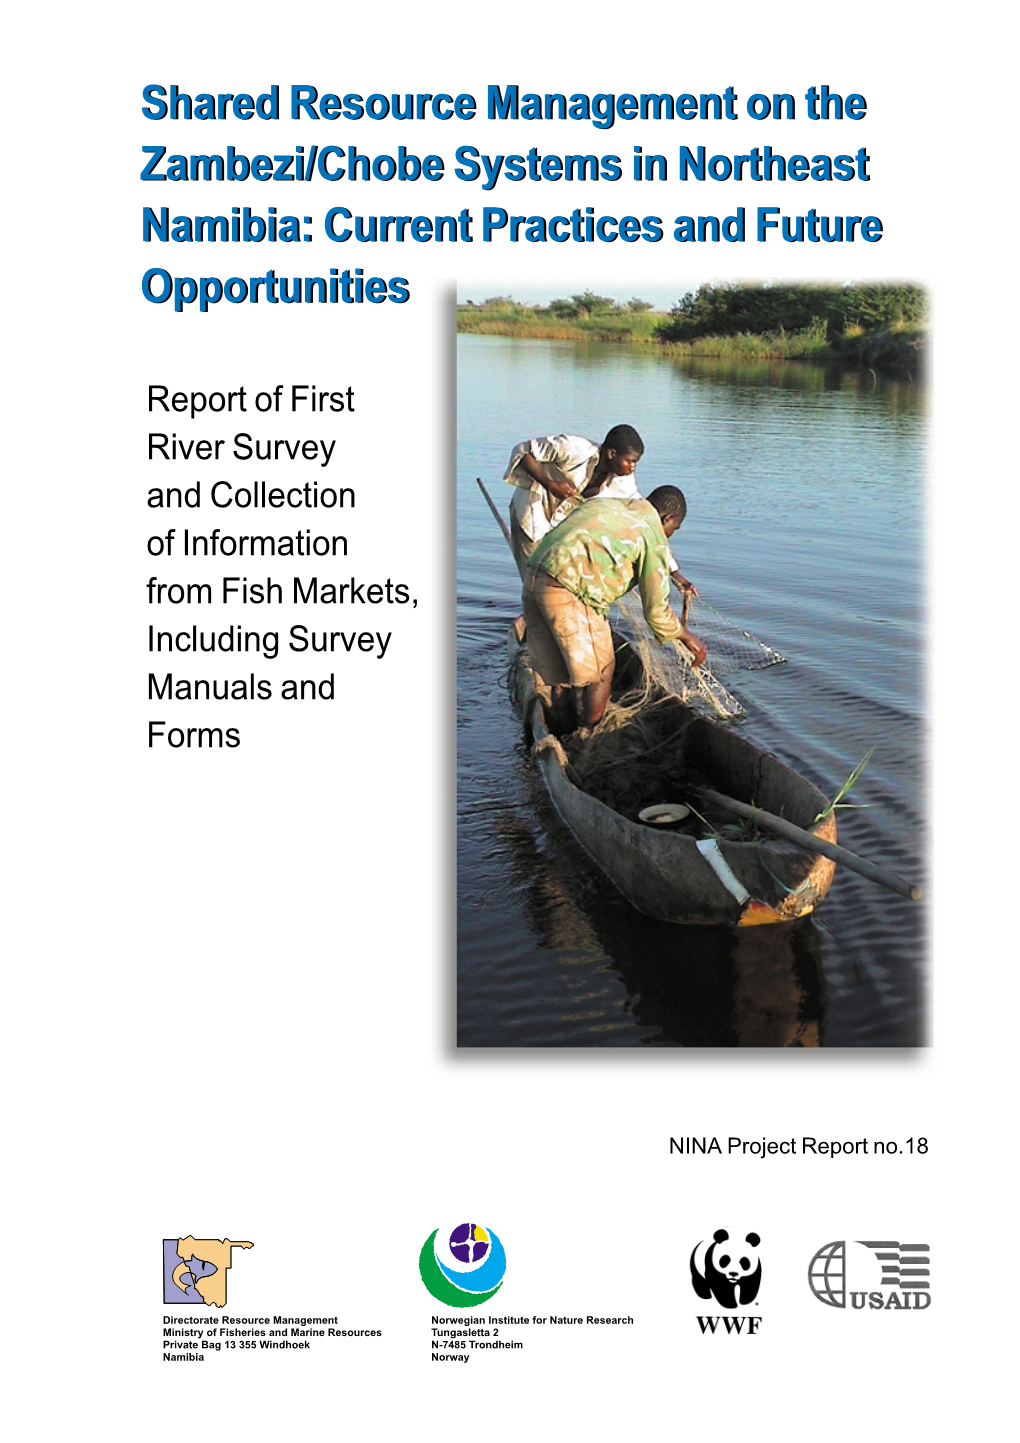 Shared Resource Management on the Zambezi/Chobe Systems in Northeast Namibia: Current Practices and Future Opportunities